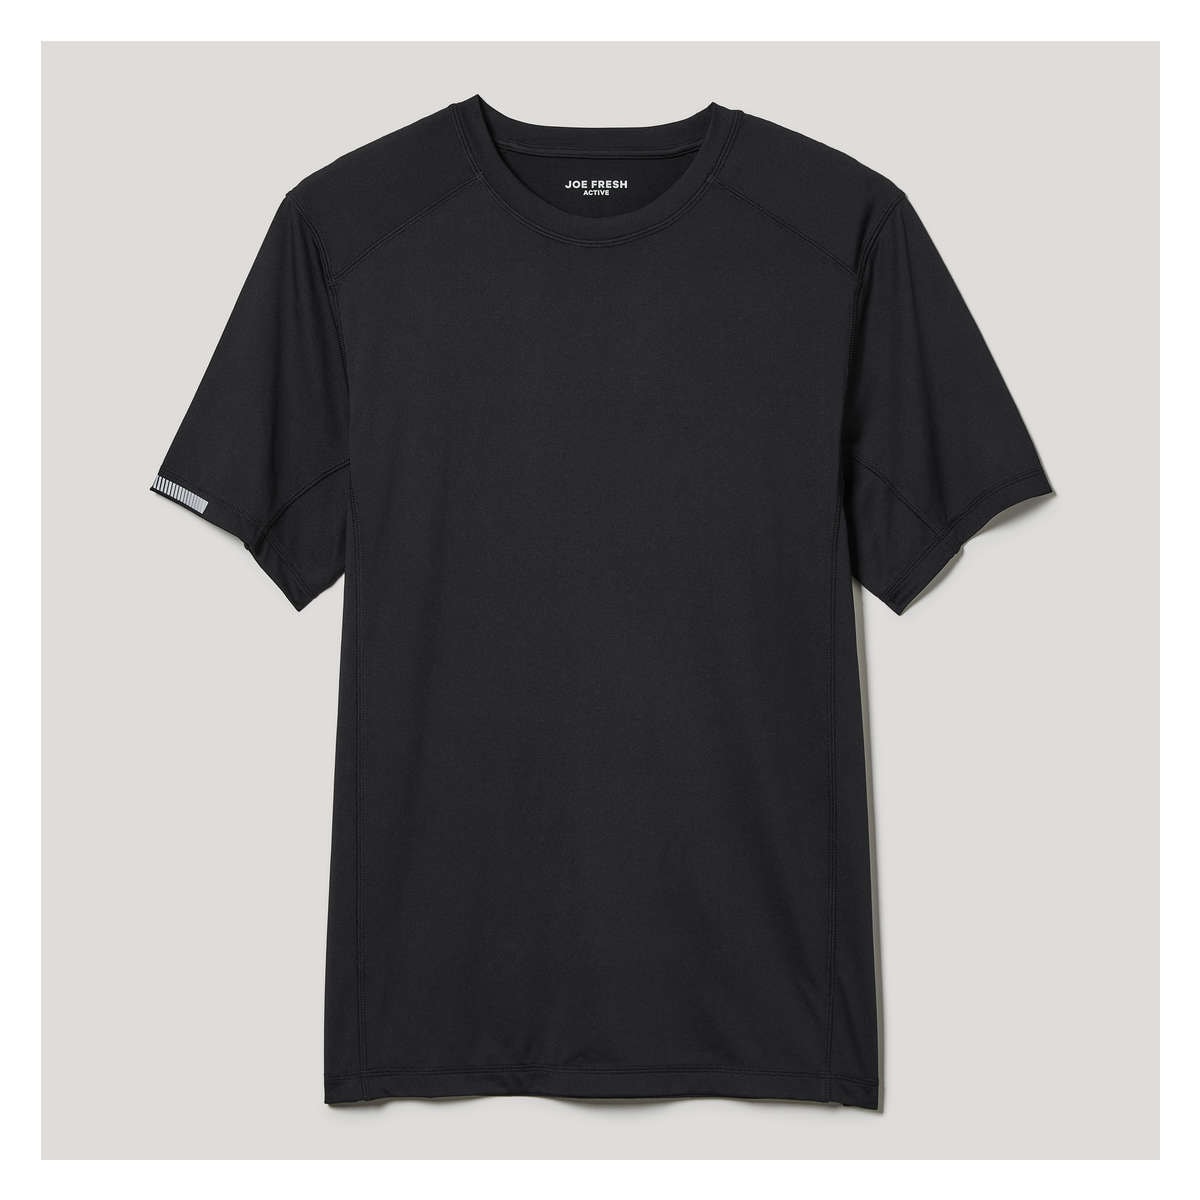 Men's Four-Way Stretch Active Tee in Black from Joe Fresh